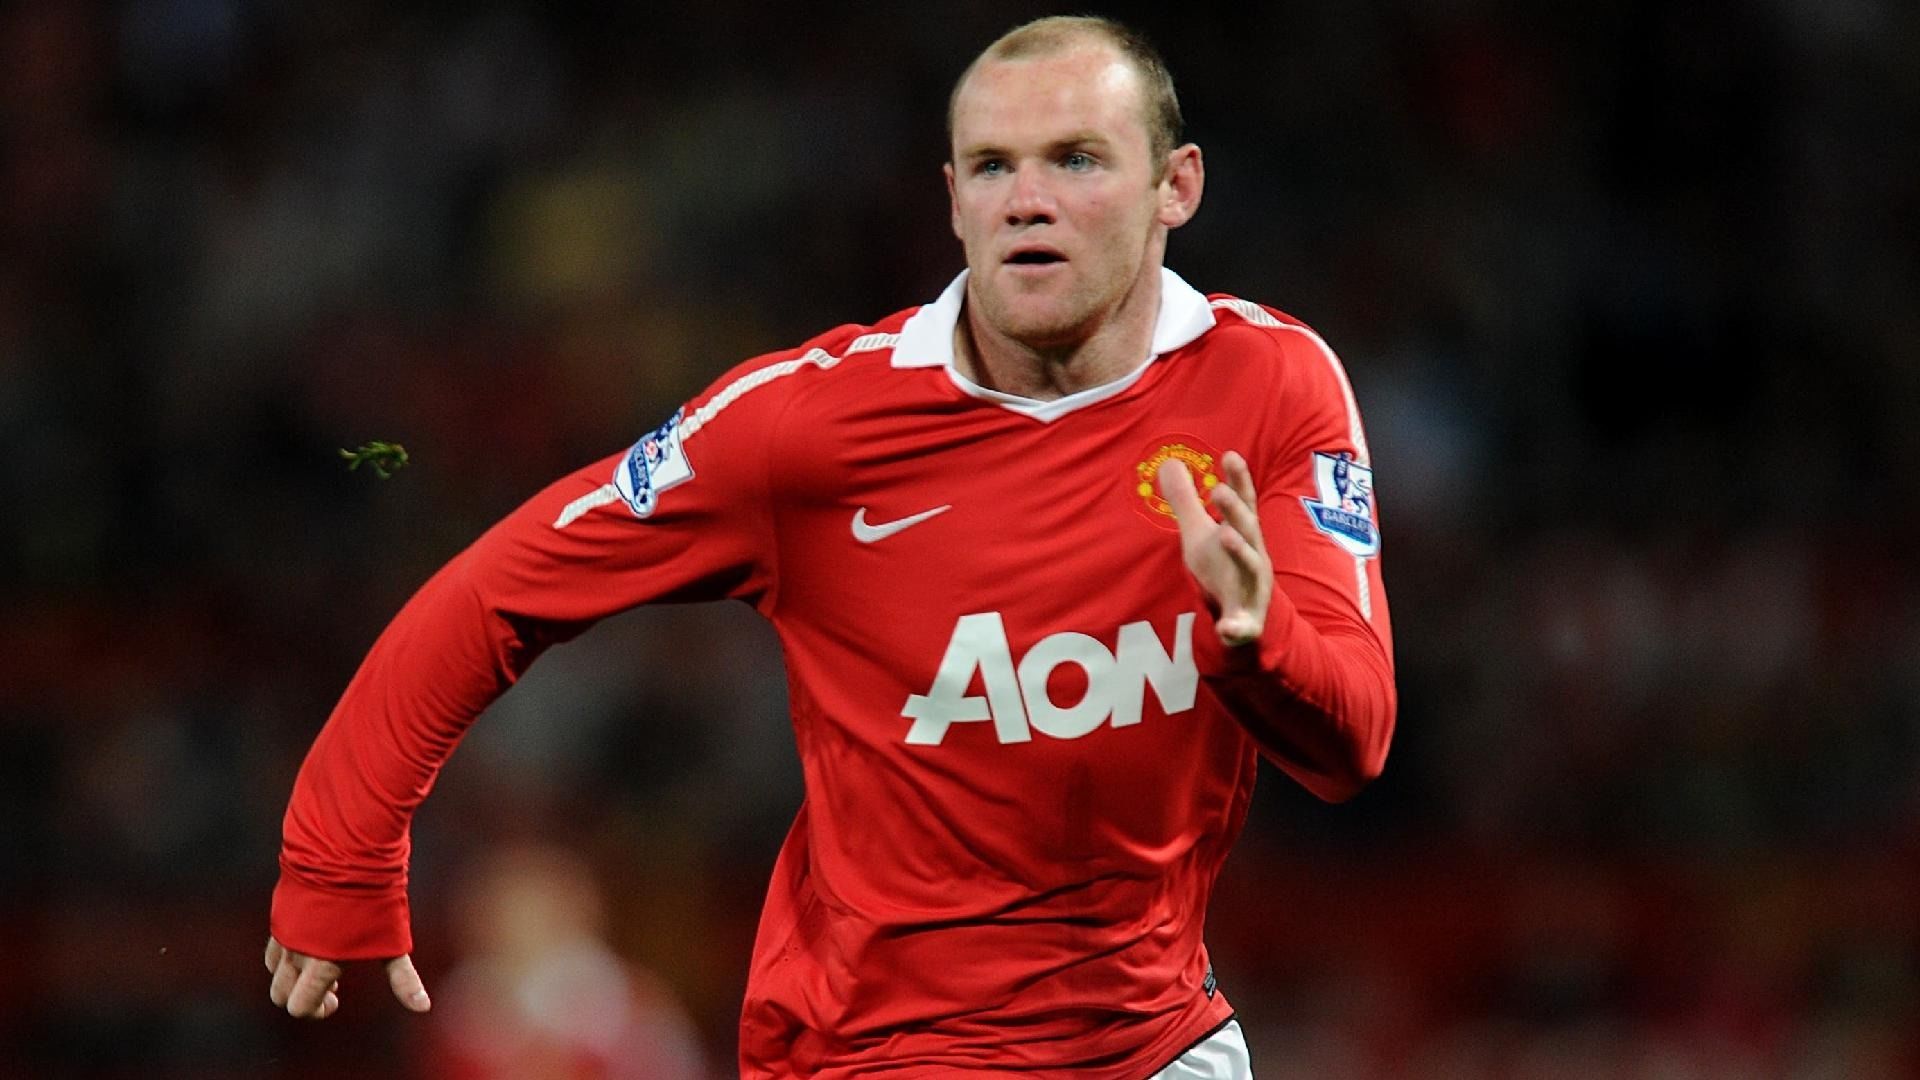 Wayne Rooney Reveals Early Alcohol Abuse Struggles At 14